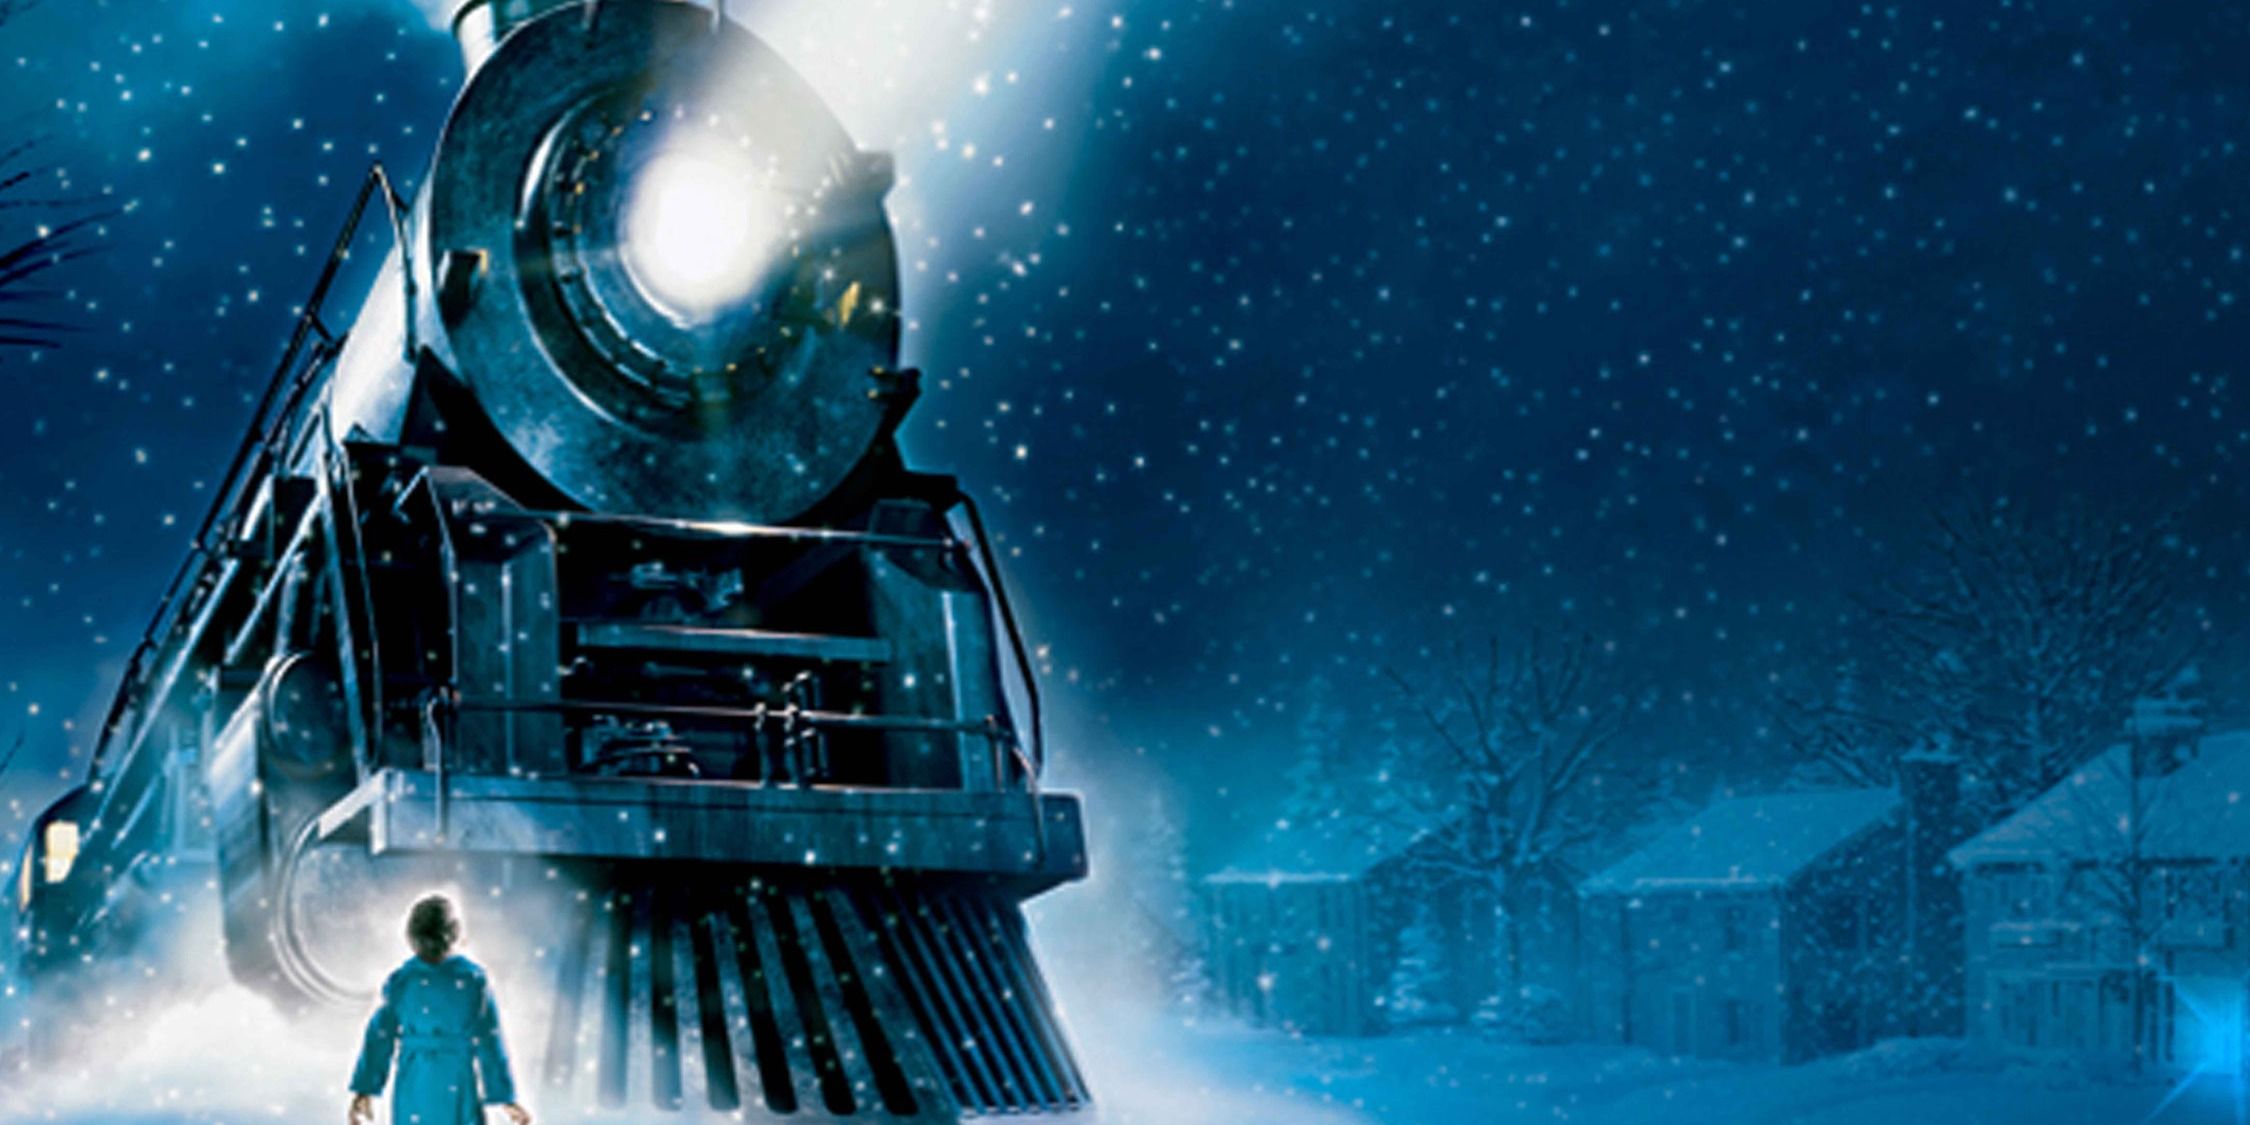 The Polar Express Cast Guide: Who Voices Each Character